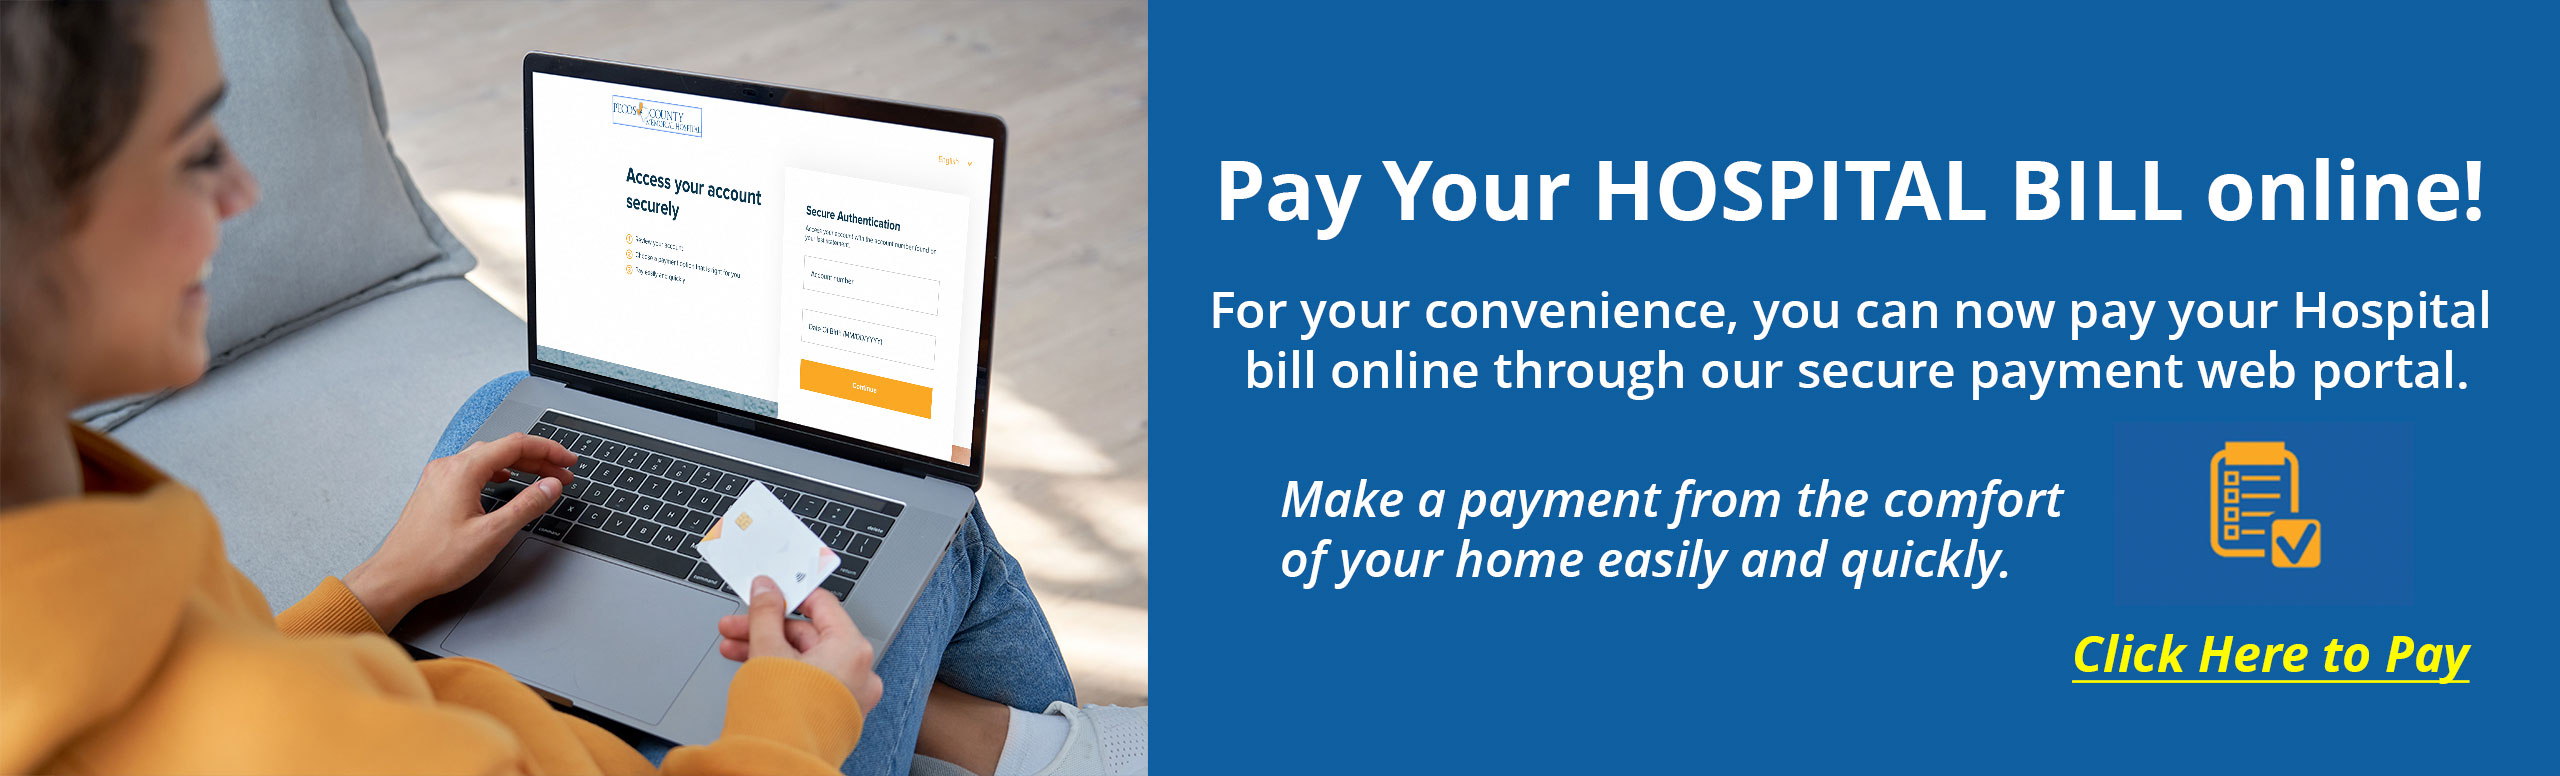 Pay Your Hospital Bill Online!

For your convenience, you can now pay your Hospital 
bill online through our secure payment web portal.

Make a payment from the comfort 
of your home easily and quickly.